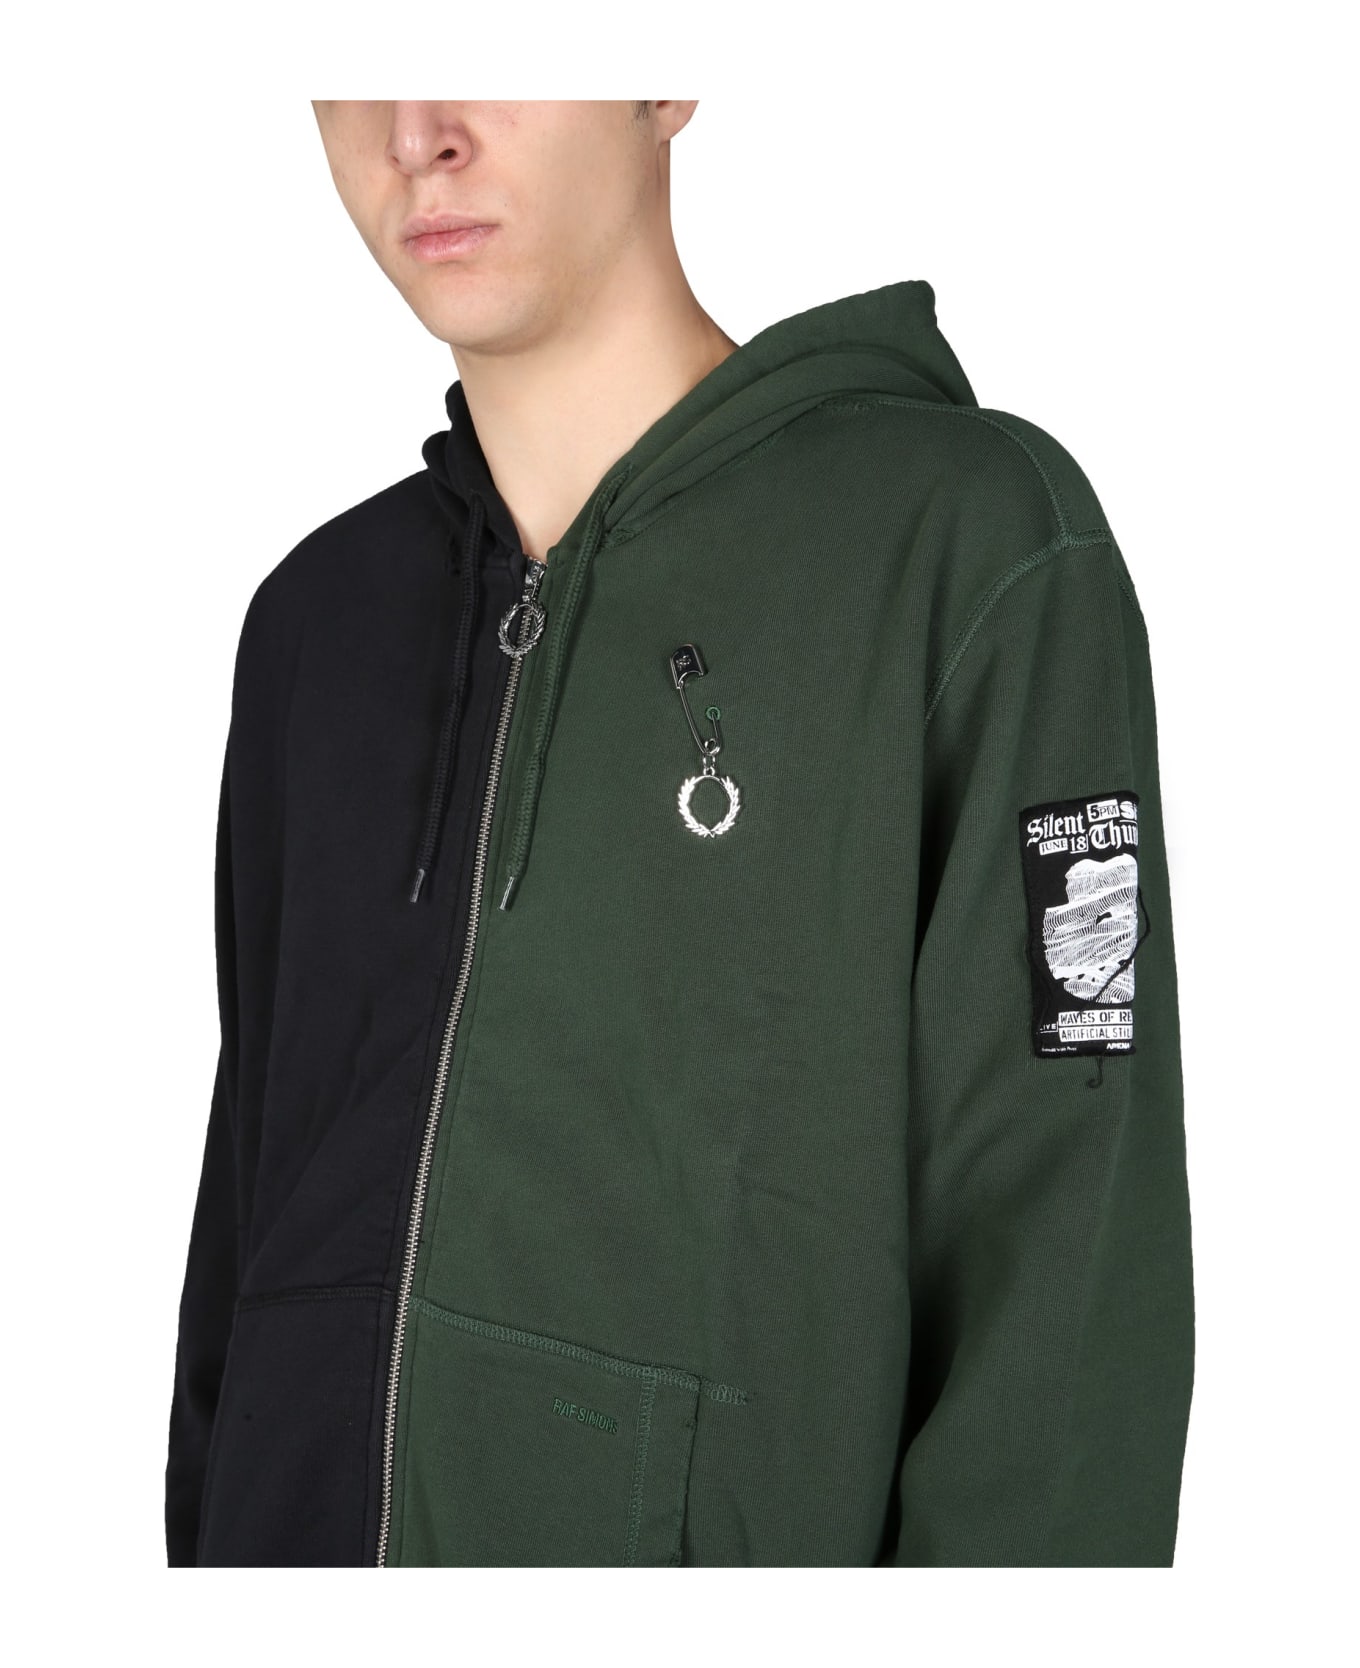 Fred Perry by Raf Simons Zip Sweatshirt. - MULTICOLOR